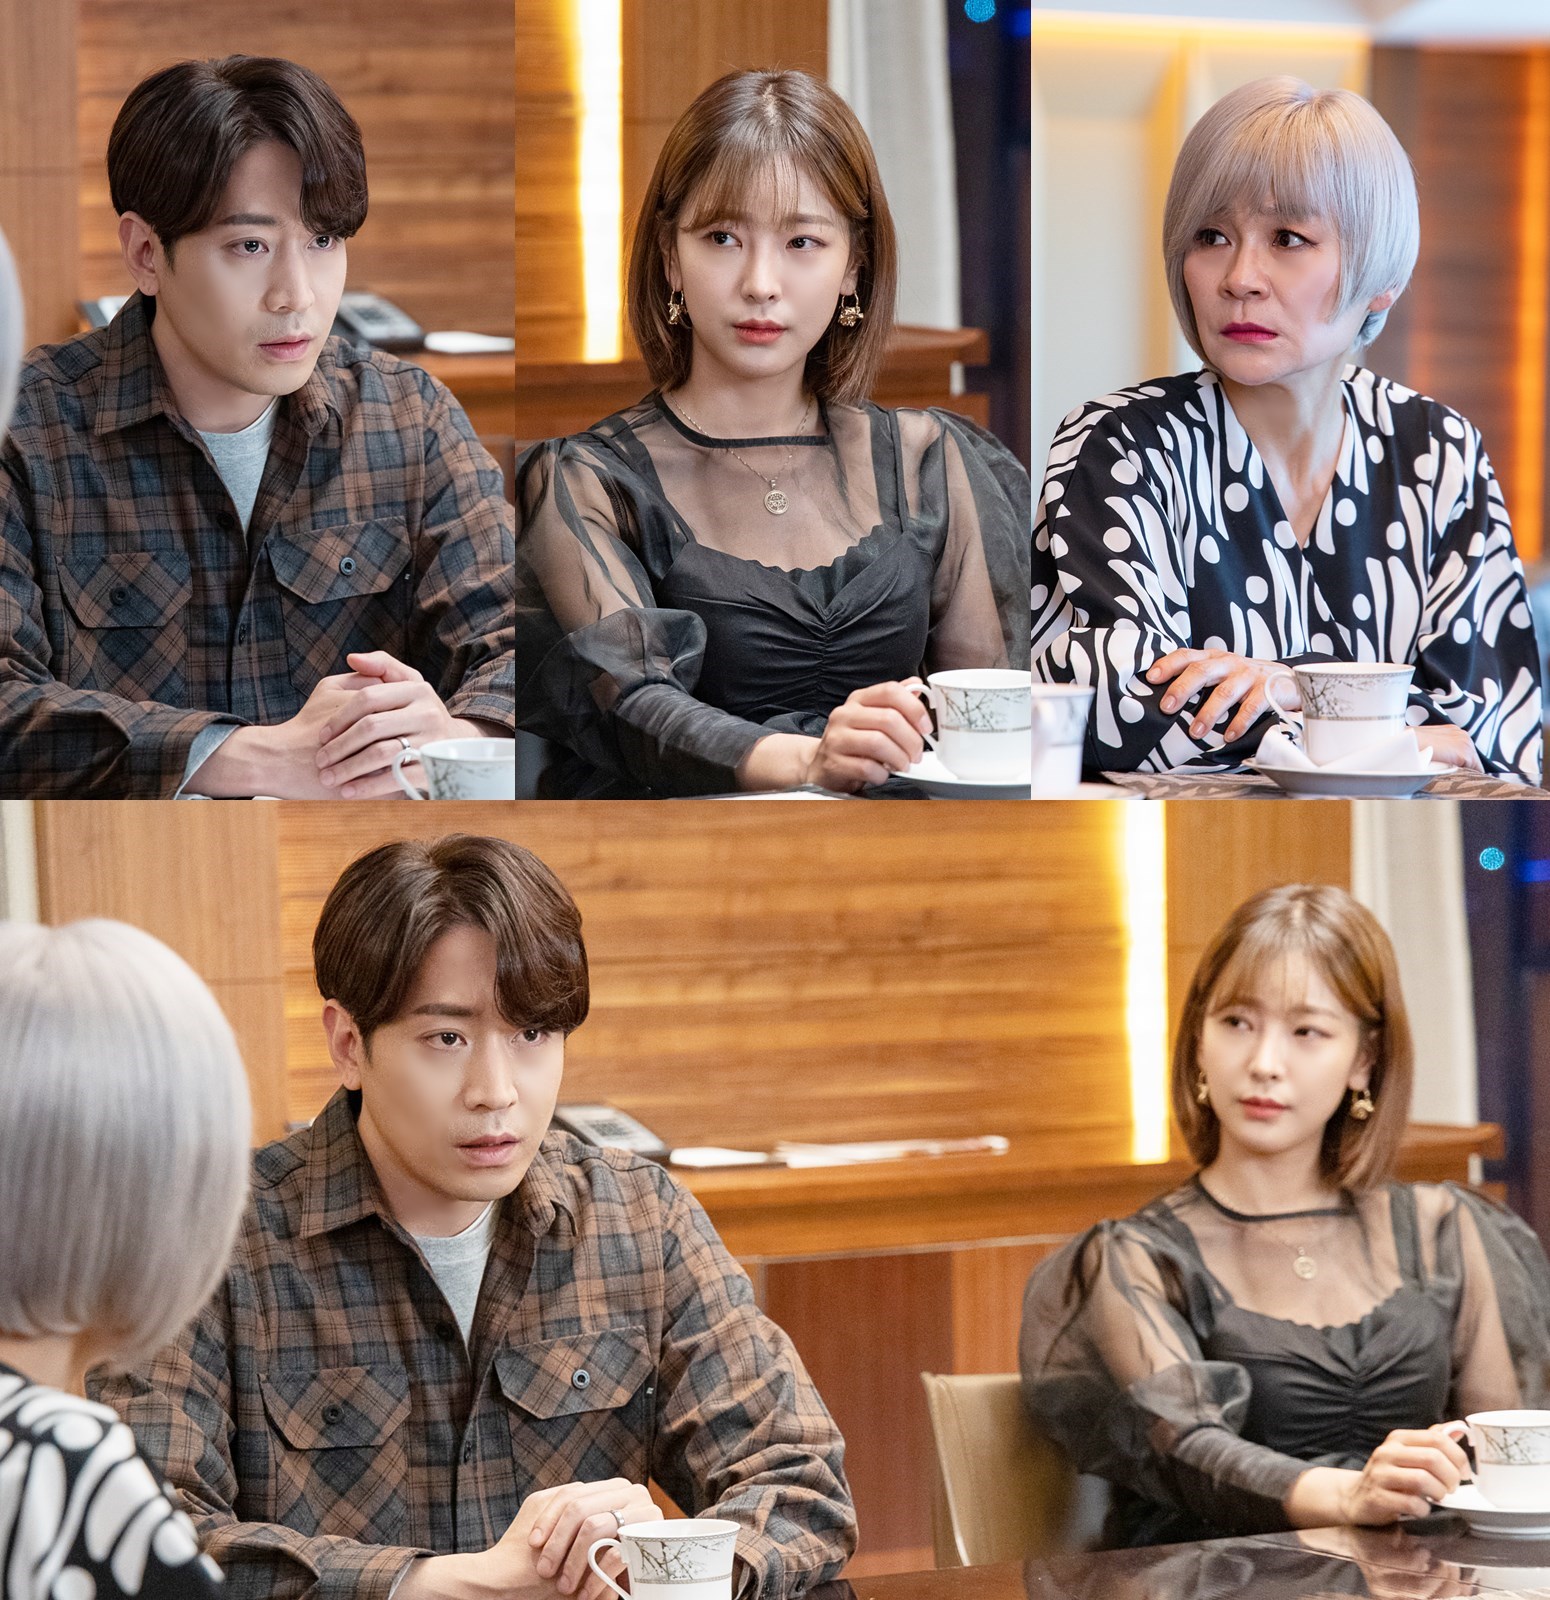 Eric Mun and Ko Won-hee and Hae-yoen Gil held up multiple blades.Channel A, which will be broadcast on May 15 (Fri), is Drama Moon Chef (director Choi Do-hoon, Jeong Heon-su/playwright Jung Yu-ri, Kim Kyung-soo/production story network, globic entertainment) 15 times, Eric Mun (played by Moon Seung-mo), Ko Won-hee (played by Bellagio), and Hae-yoen Gil (played by Jang Sun-young) were unimportant Love Triangle (played by DJ Ivy mix). I do.In the previously broadcast Woodsnake! Moon Chef, it was revealed that the perpetrator of the Pungcheonok Fire accident was Lim Chul-yong (Guidance Award), and Moon Seung-mo (Eric Mun) was shocked.Moon Seung-mo secretly searched for Lim Chul-yongs company to find decisive crime evidence and heightened tension.While it is clear that all crimes, from the death of Yu Bellagio (Ko Won-hee)s mother to the Pungcheon Ok Fire, are made by Lim Chul-yong, the photos released show Moon Seung-mo, Yu Bellagio and Jang Sun-young gathering together in a secret place, raising questions.The three people are thoroughly security before meeting, and the serious atmosphere continues throughout the conversation, which stimulates curiosity about what the conversation between the three people is.In particular, Moon Seung-mo is trying to identify the only weakness of Lim Chul-yong and take out a hidden card that can break down.The results of Eric Mun, Ko Won-hee, and Hae-yoen Gils covert Love Triangle (DJ Ivy mix) will be broadcast on Friday, May 15 at 10:50 pm on Channel A Gumtos Unusual!You can check it out in Munchef.